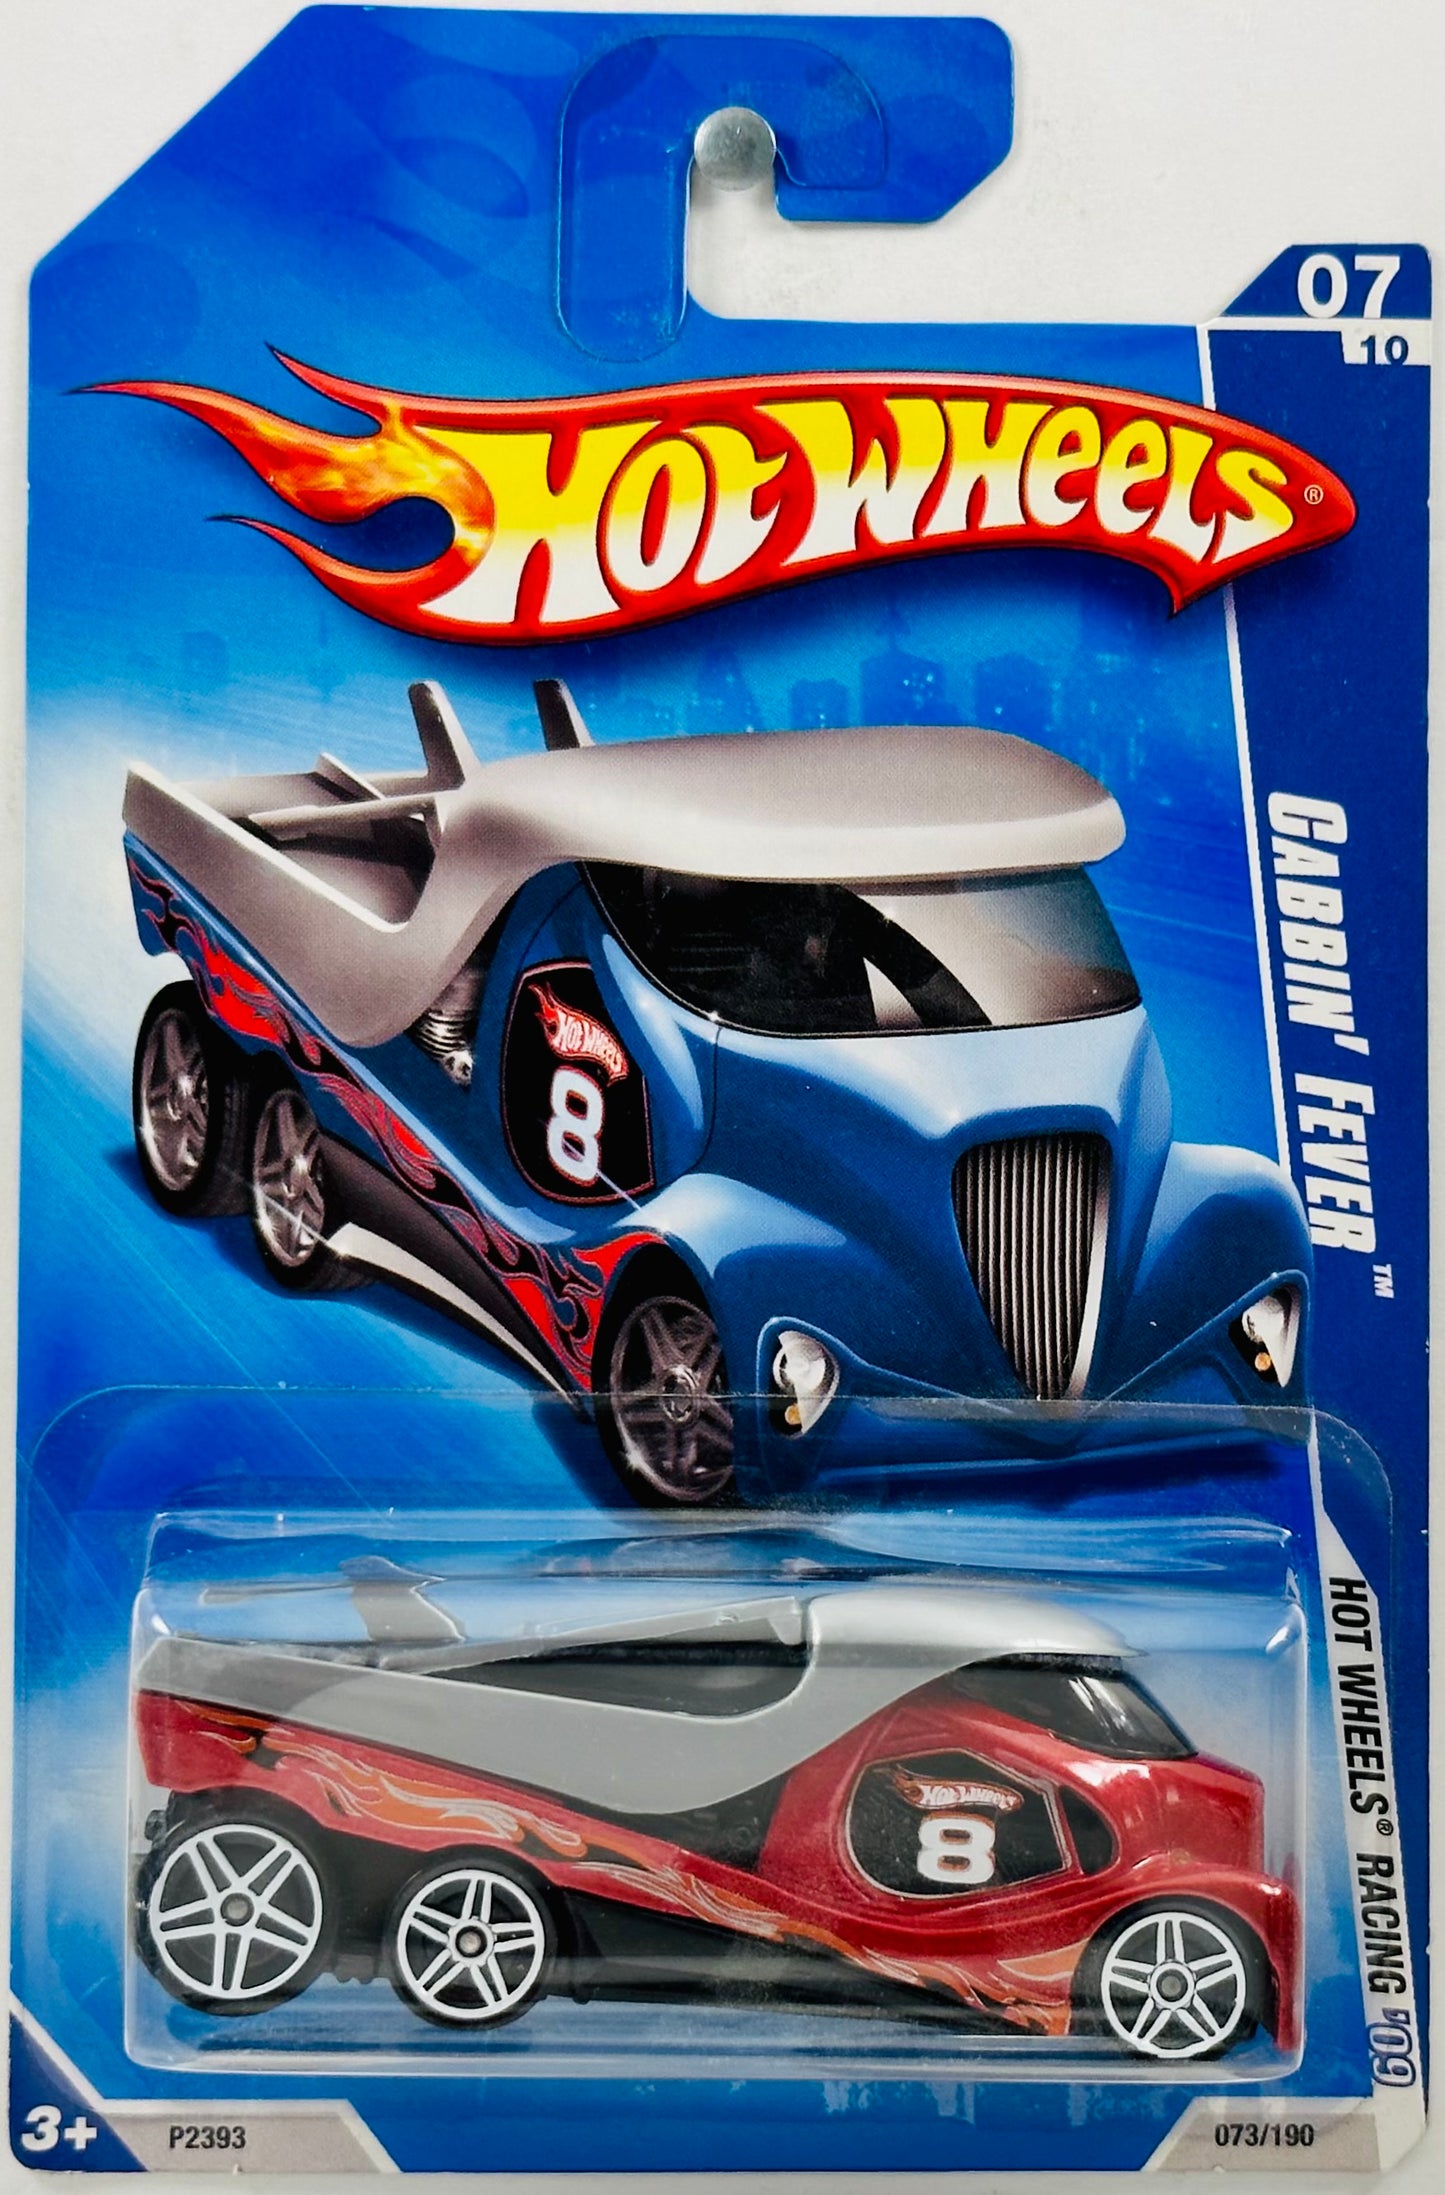 Hot Wheels 2009 - Collector # 073/190 - Hot Wheel's Racing 07/10 - Cabin' Fever - Red - '8' / Black & Sliver Flames - USA Blue Truck